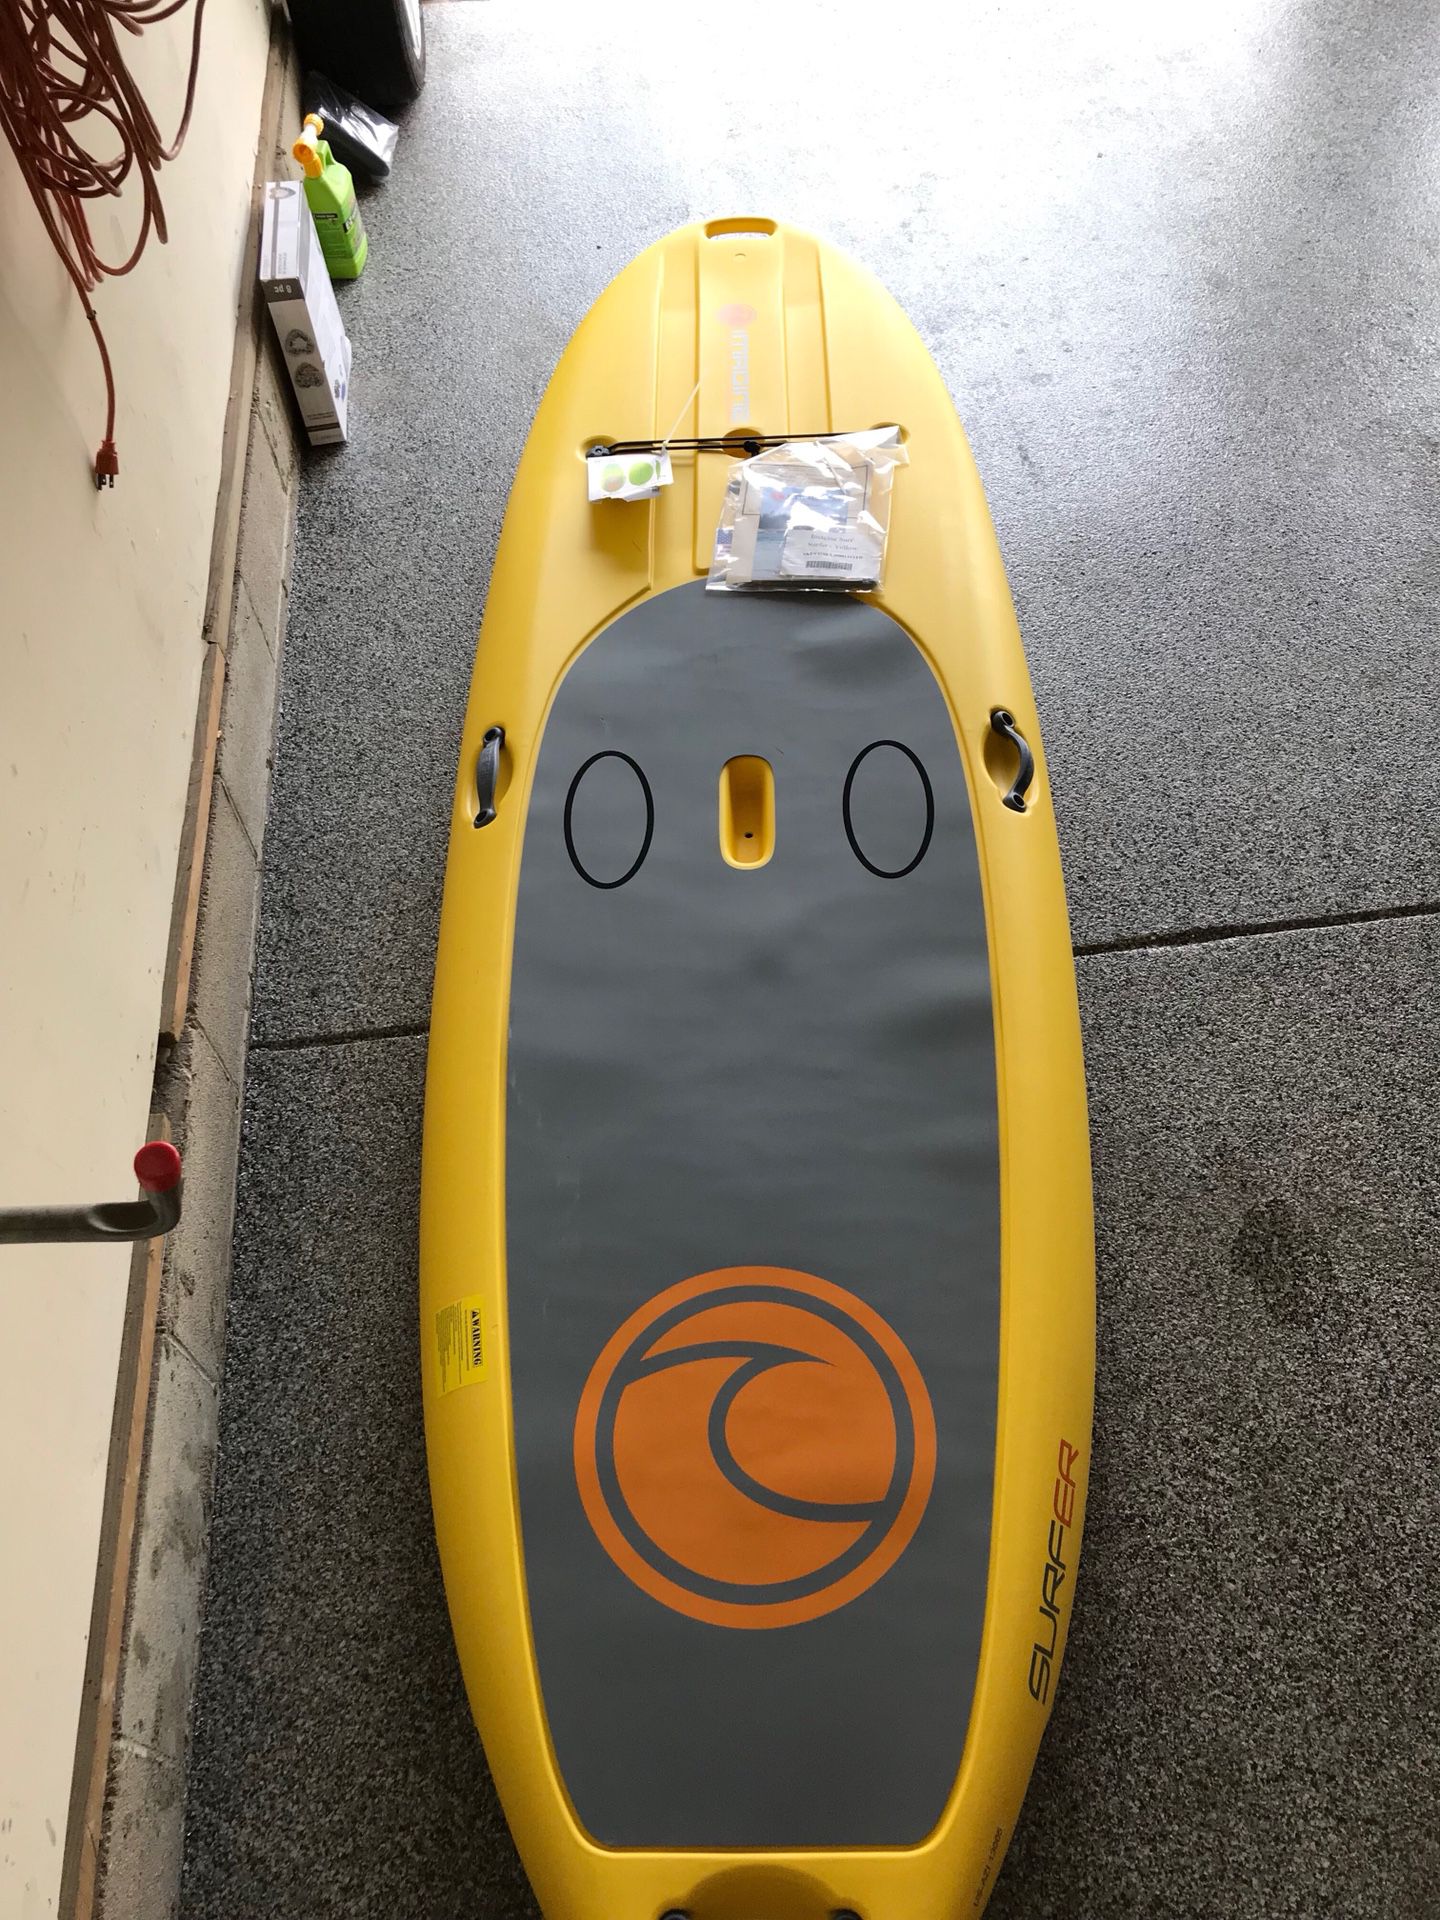 Stand Up Paddle Board - Brand new Imagine brand for beginners & intermediates